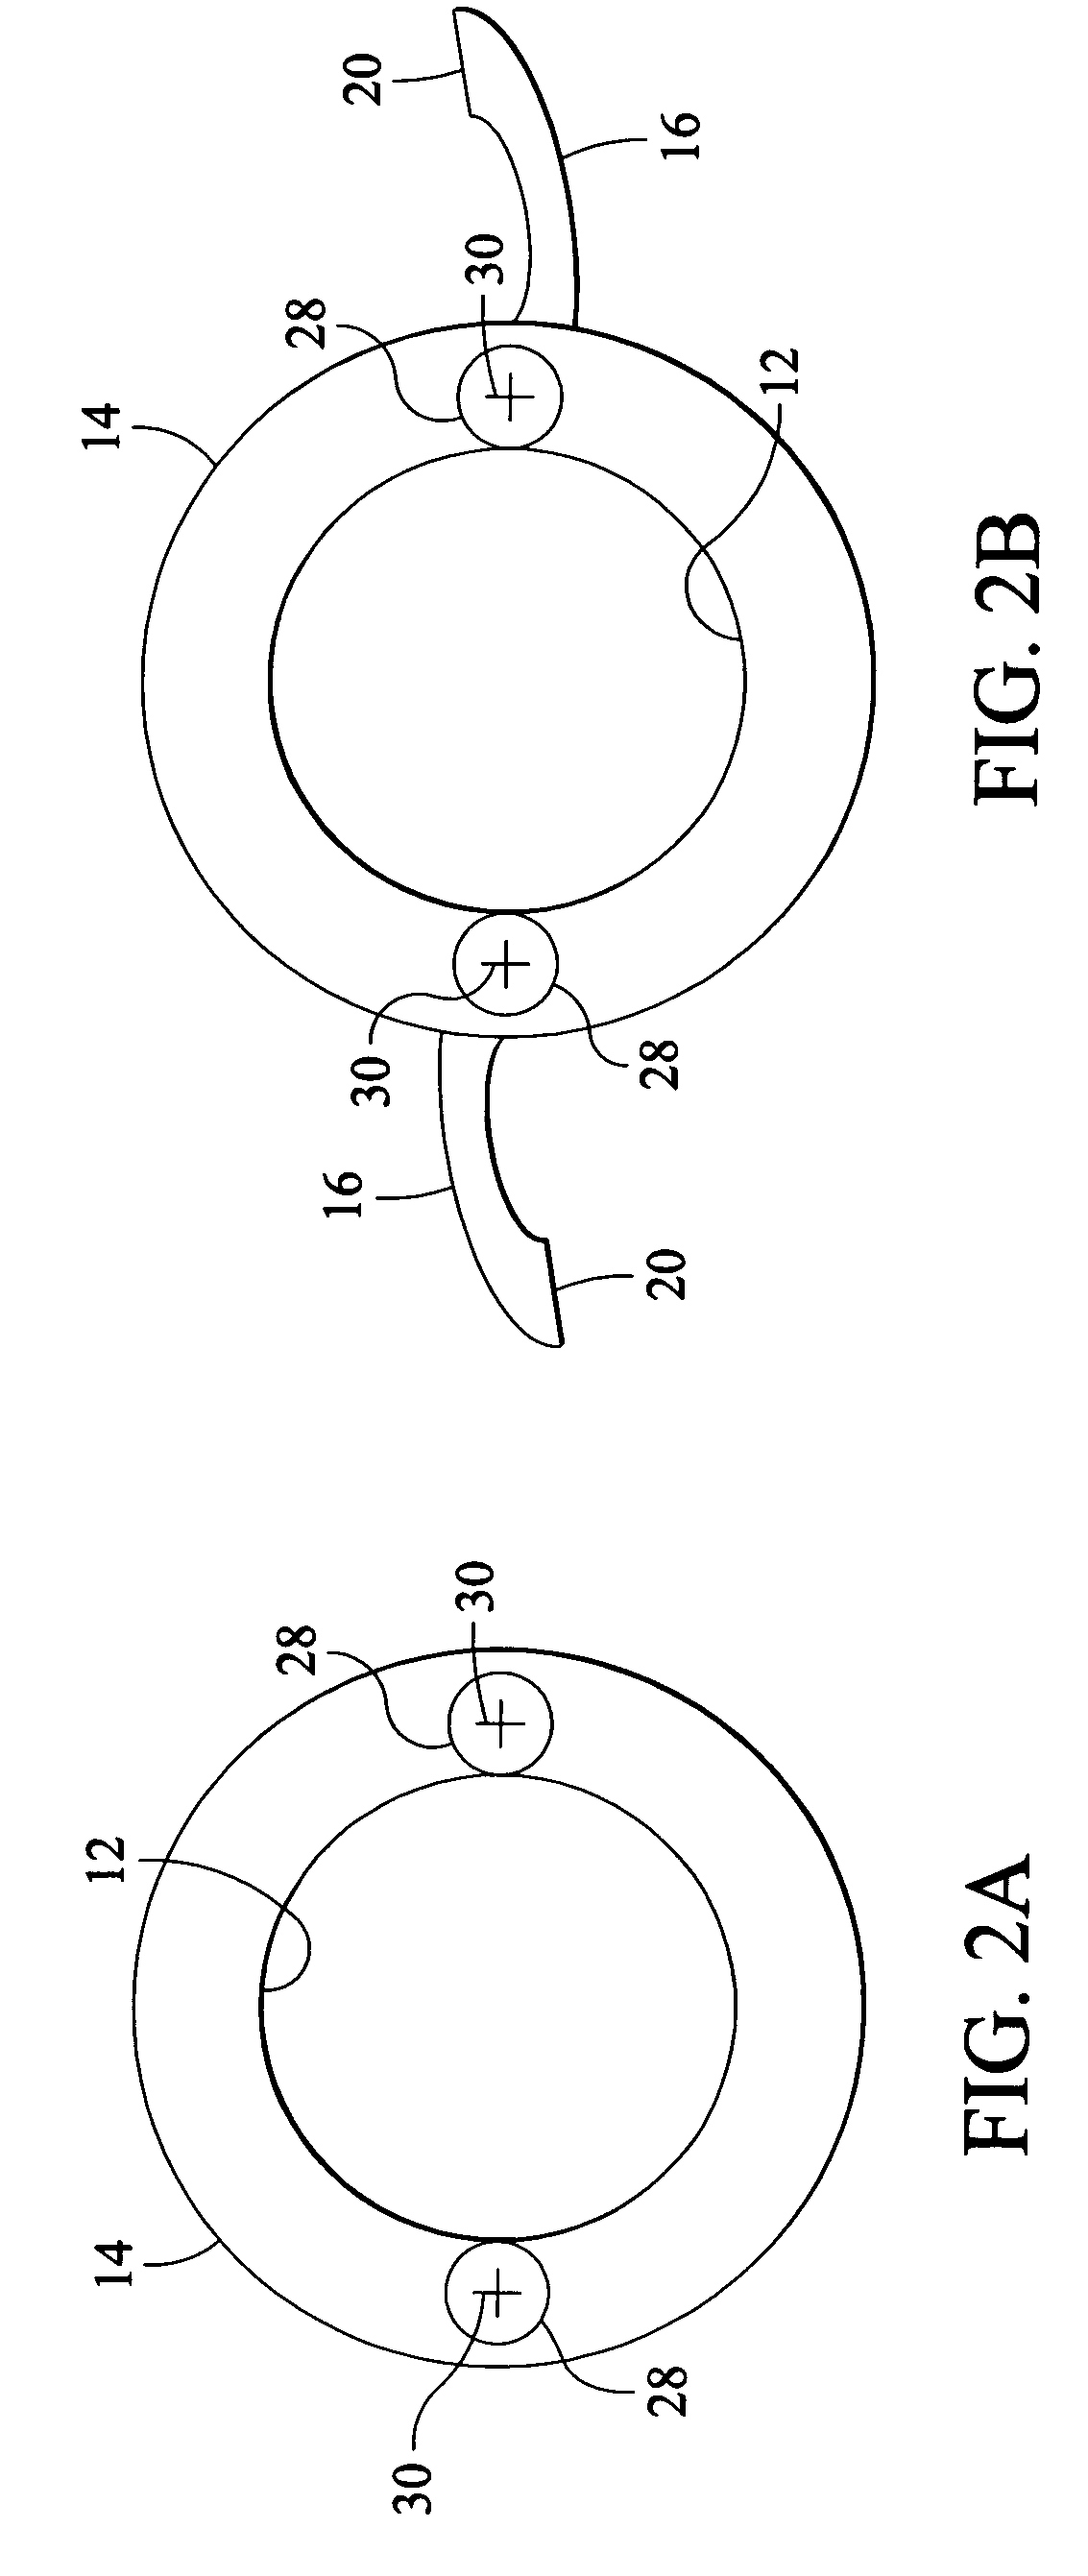 Mechanical mounting configuration for flushmount devices